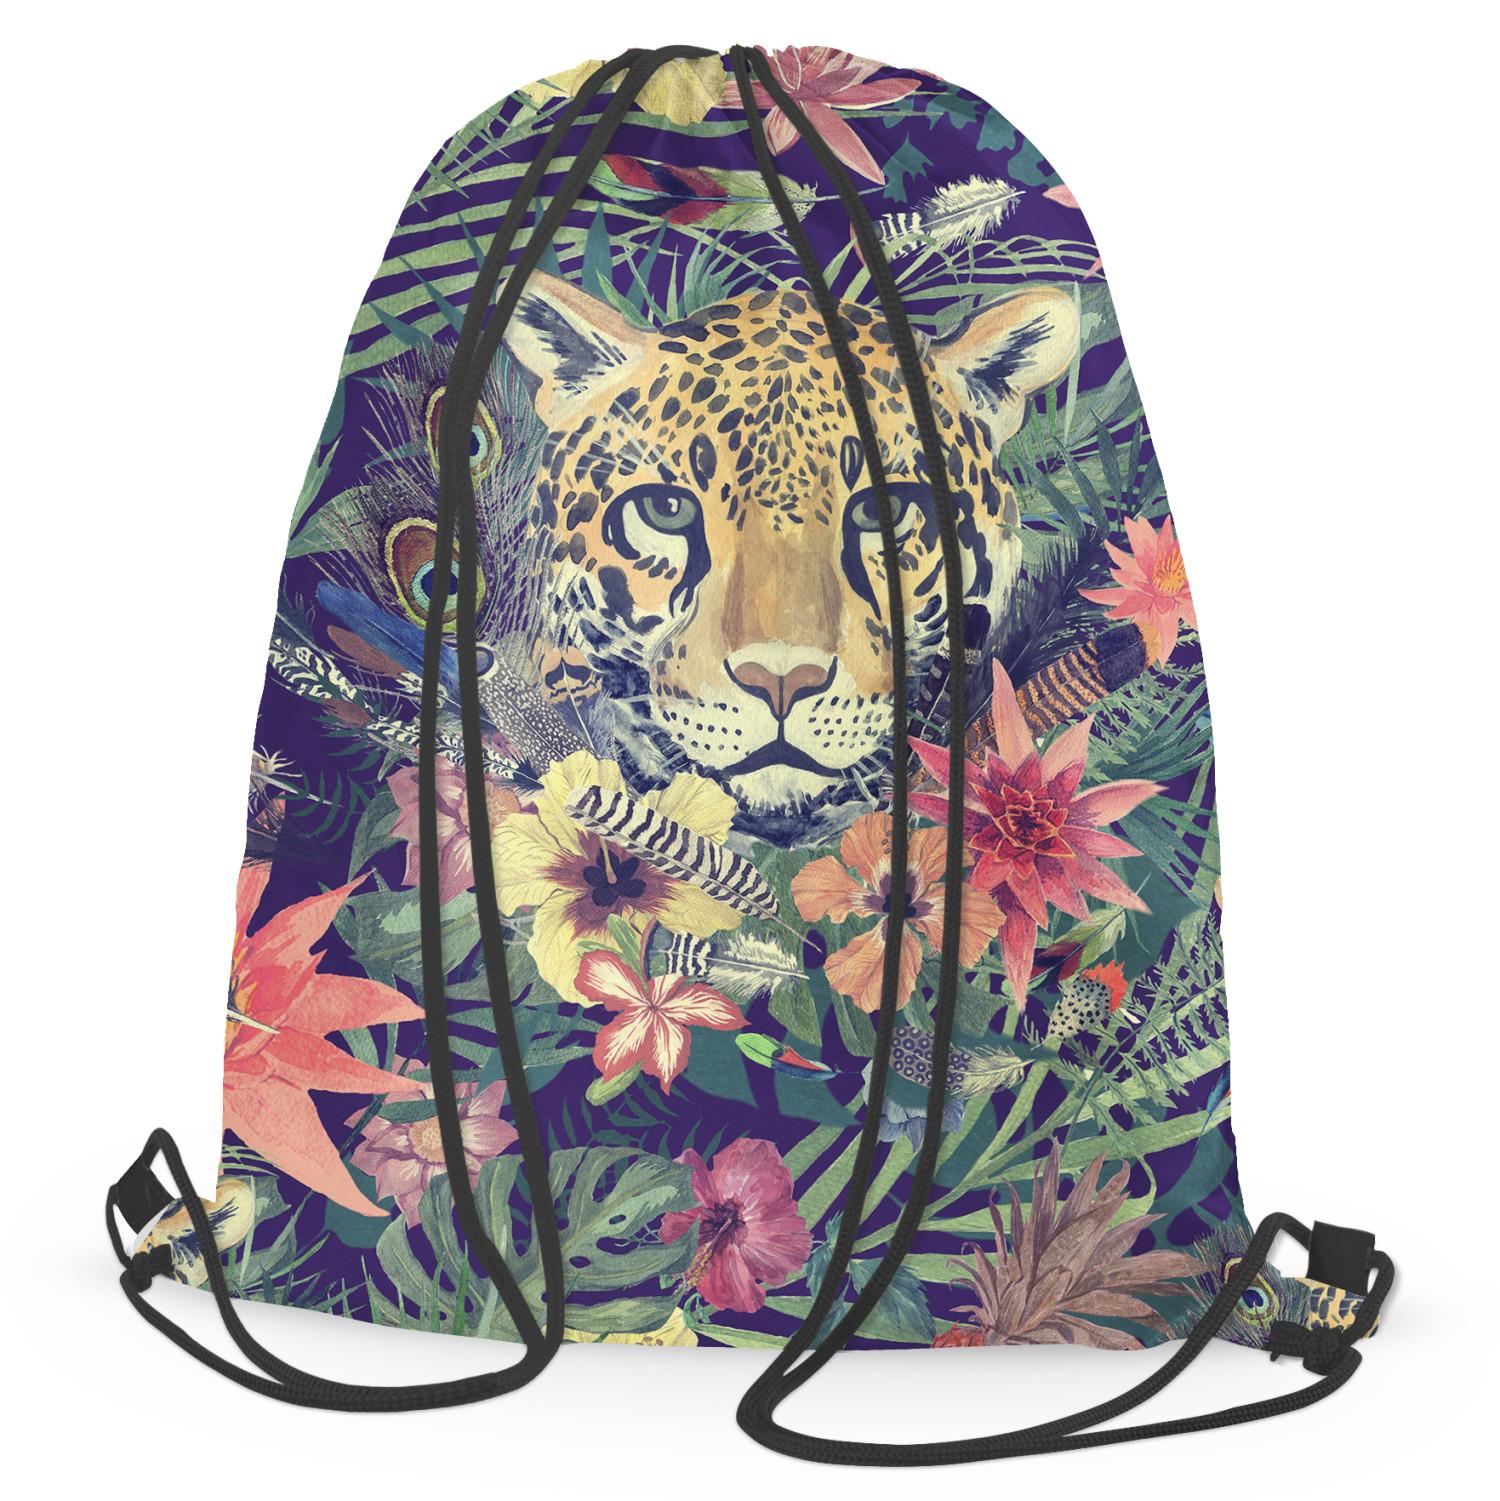 Backpack Cheetah in the leaves - wild animal, floral print in watercolour style